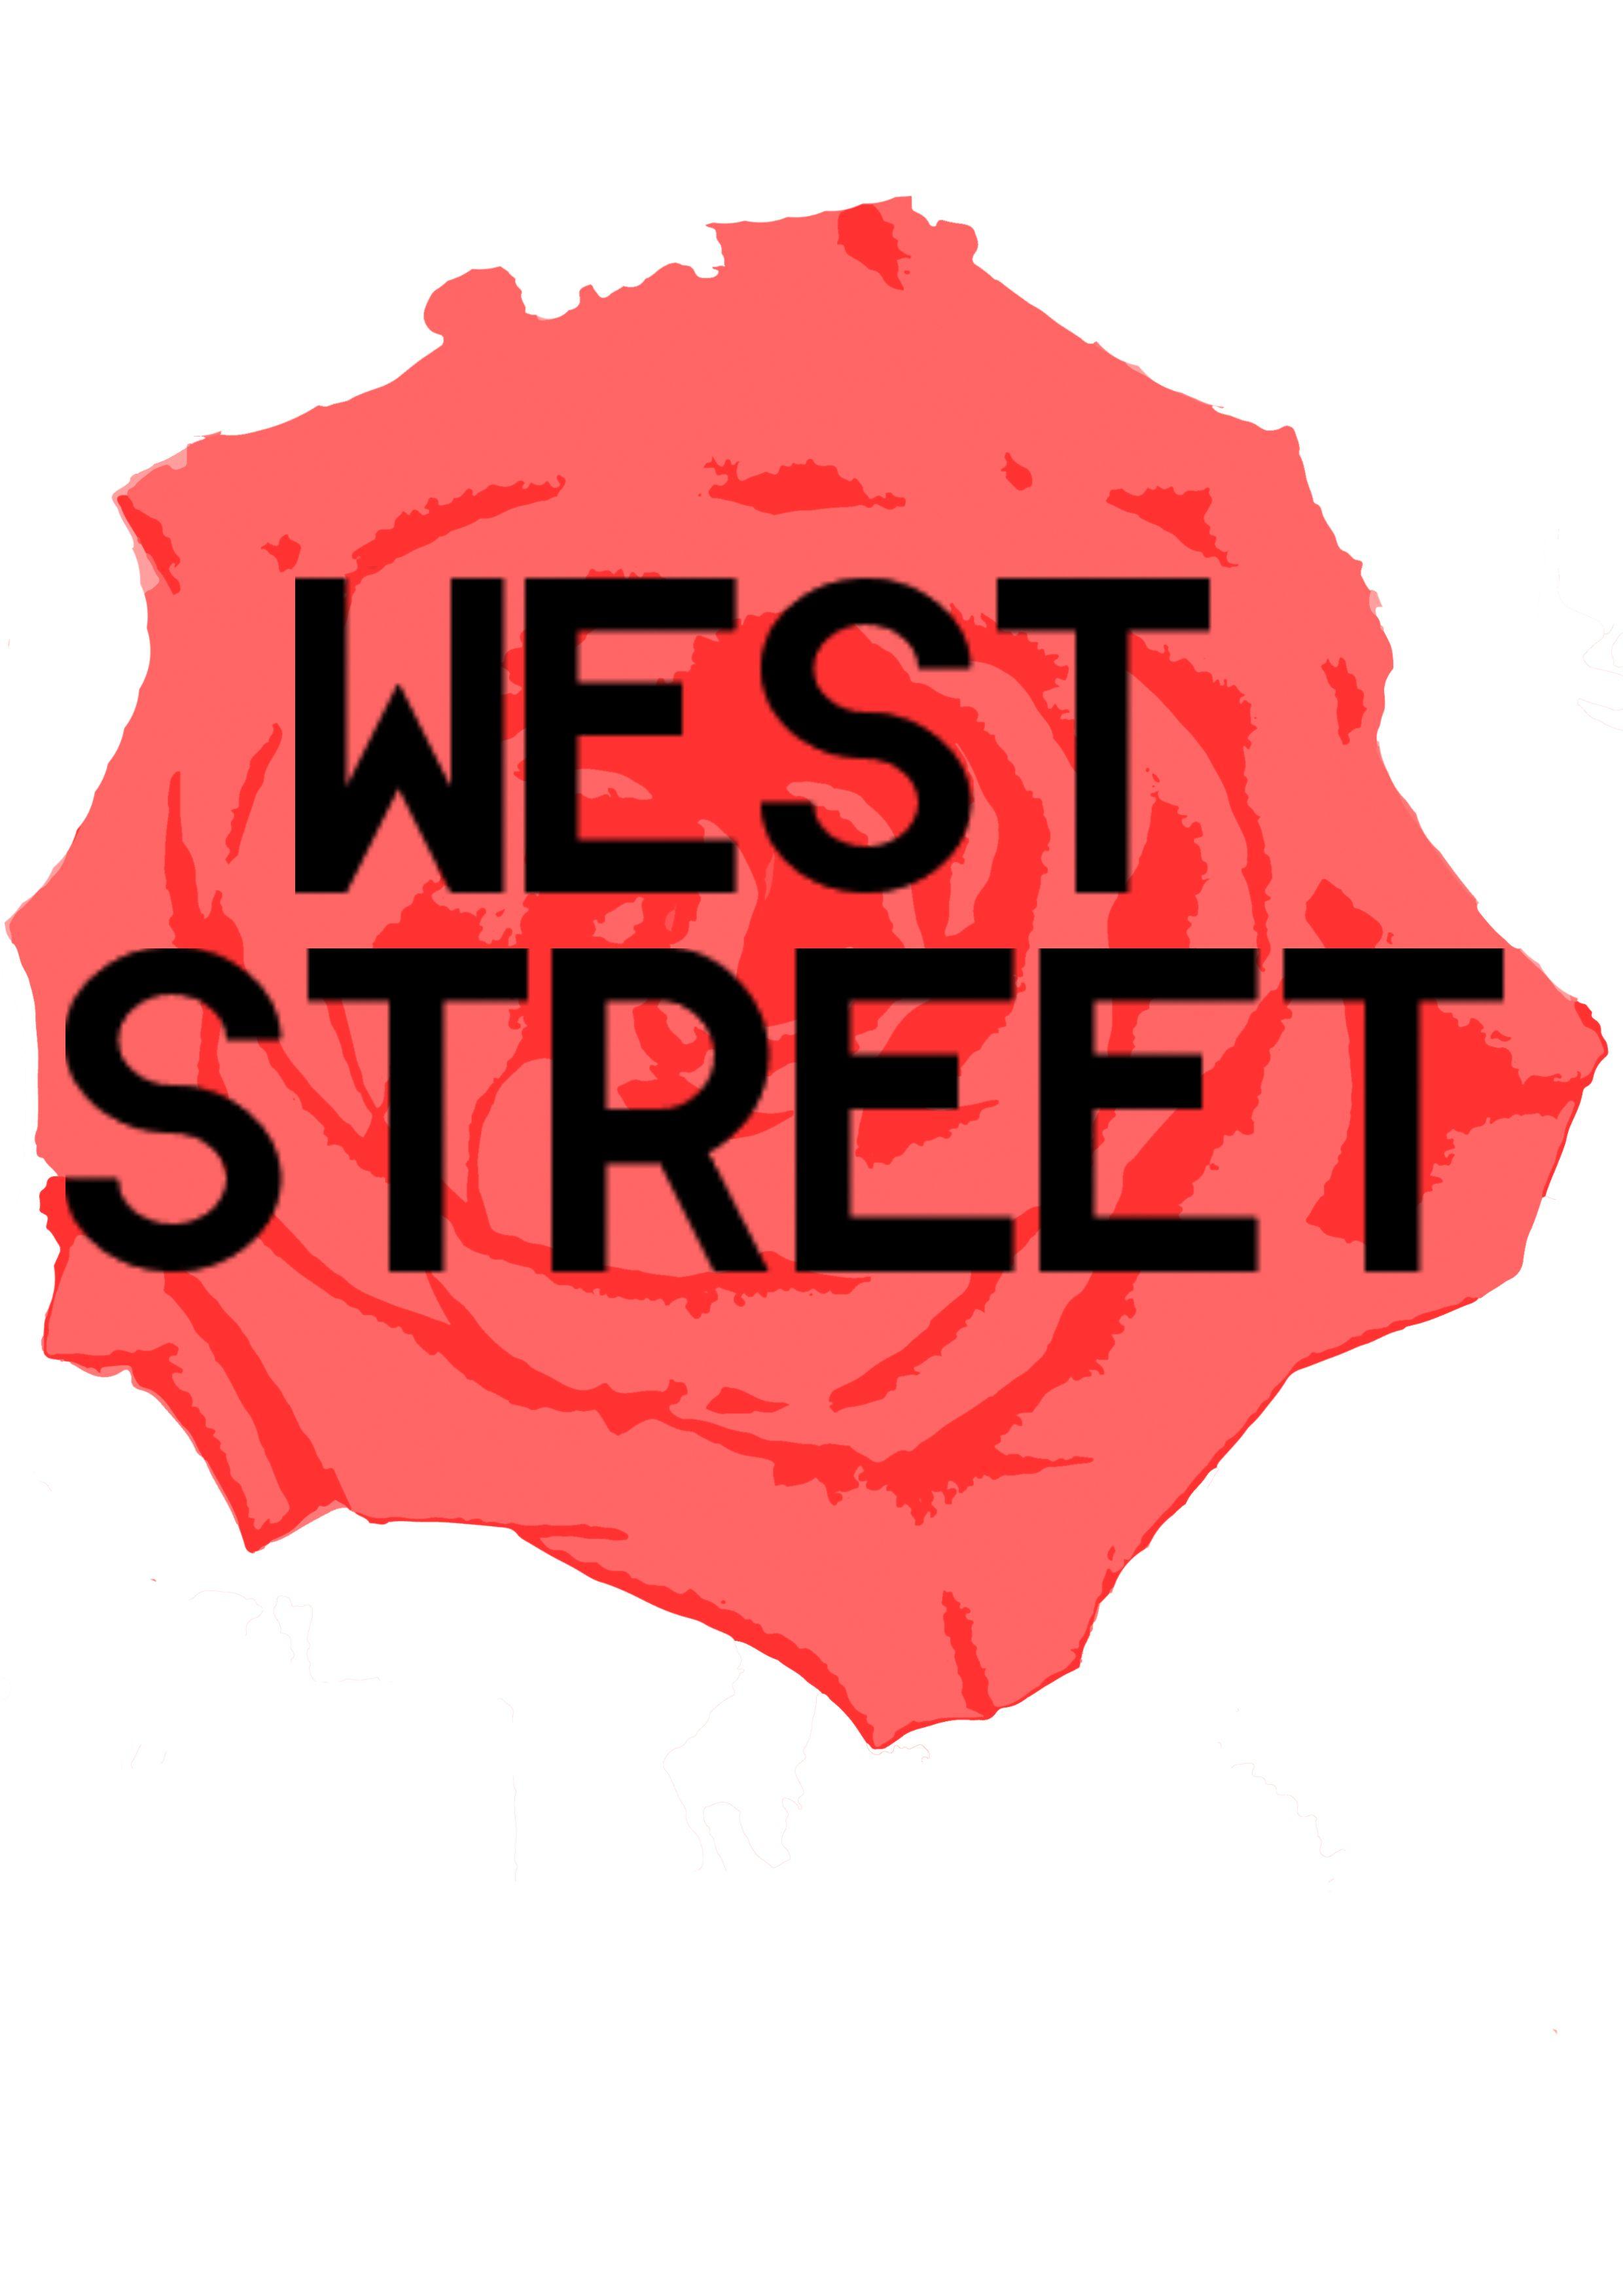 Red and Peach Logo - Personal clothing brand logo. West Street with red rose logo. New